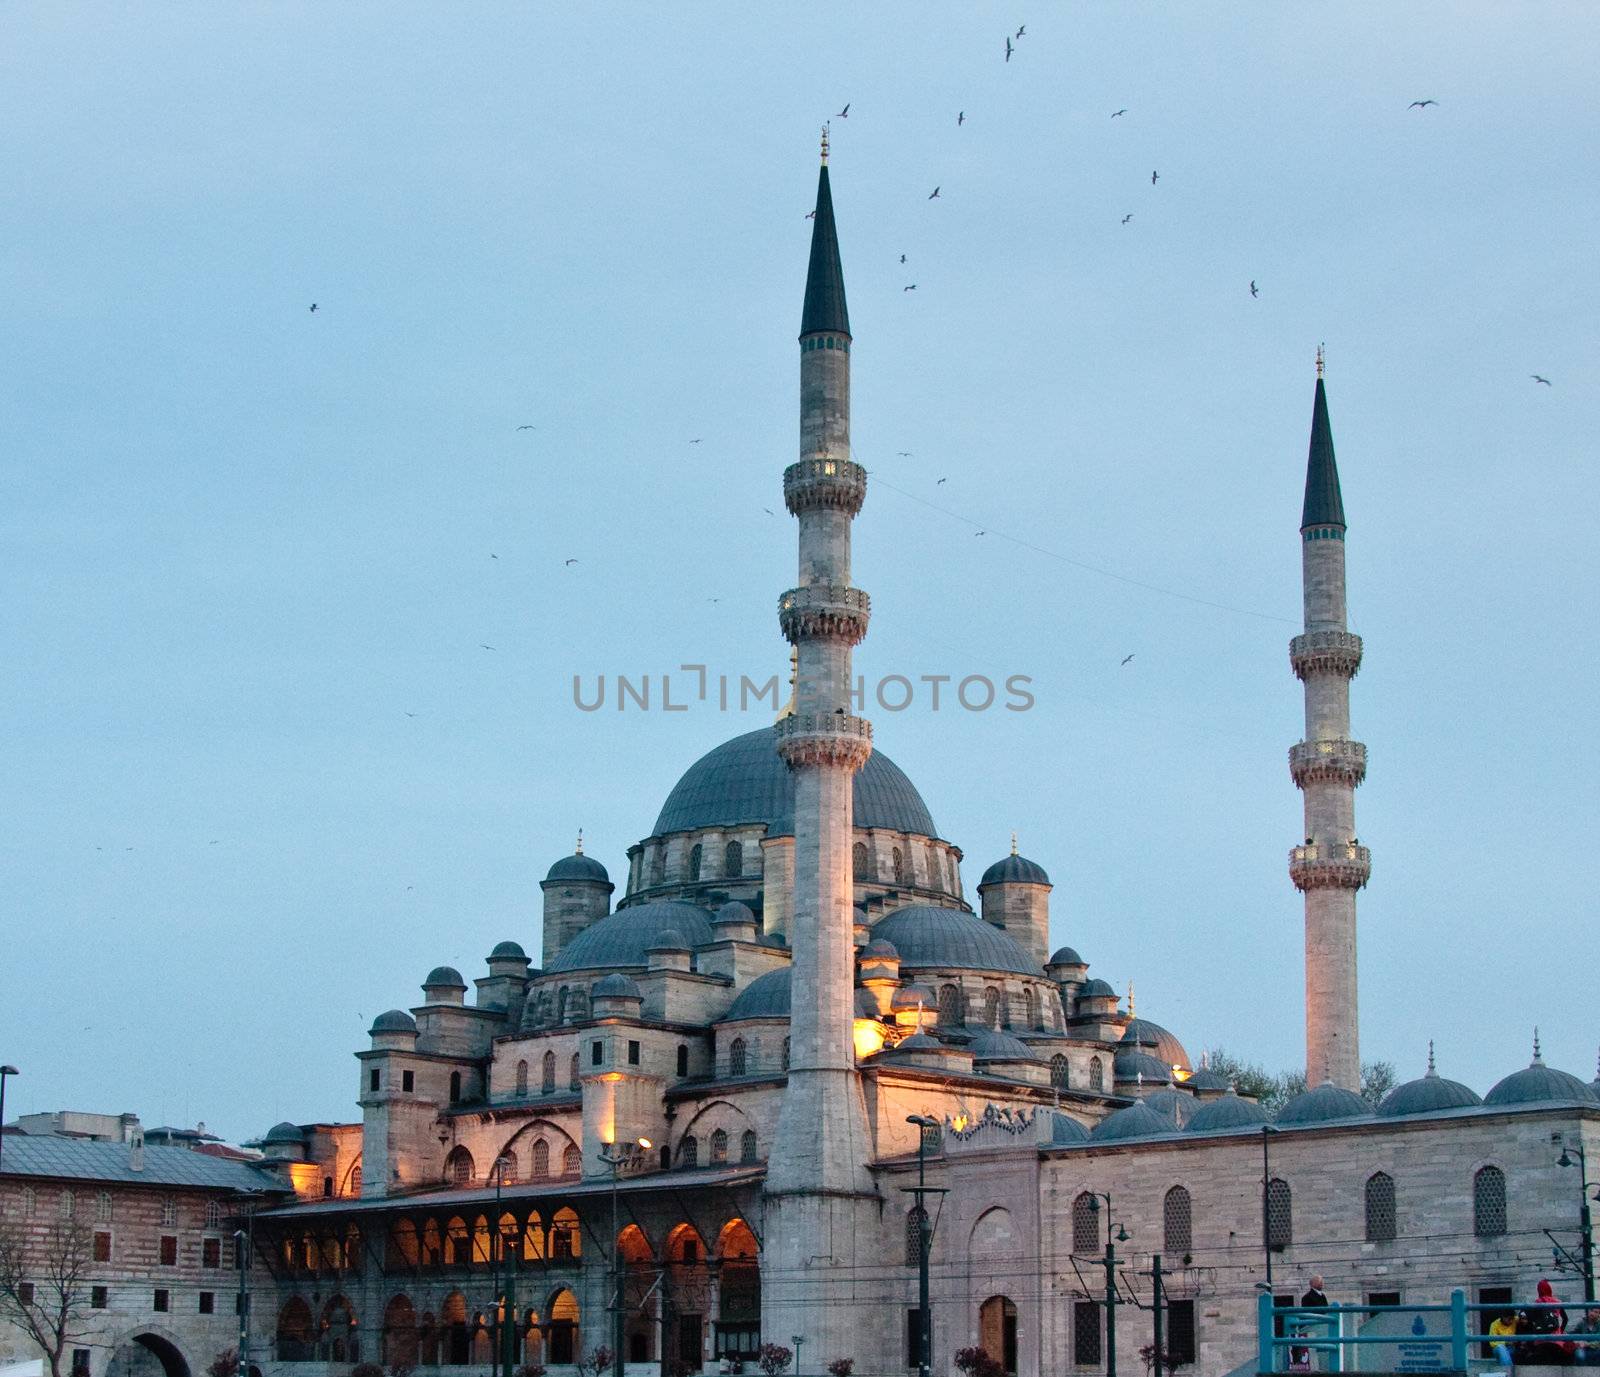 The Mosque of the Valide Sultan or New Mosque in the evening by the Galata Bridge